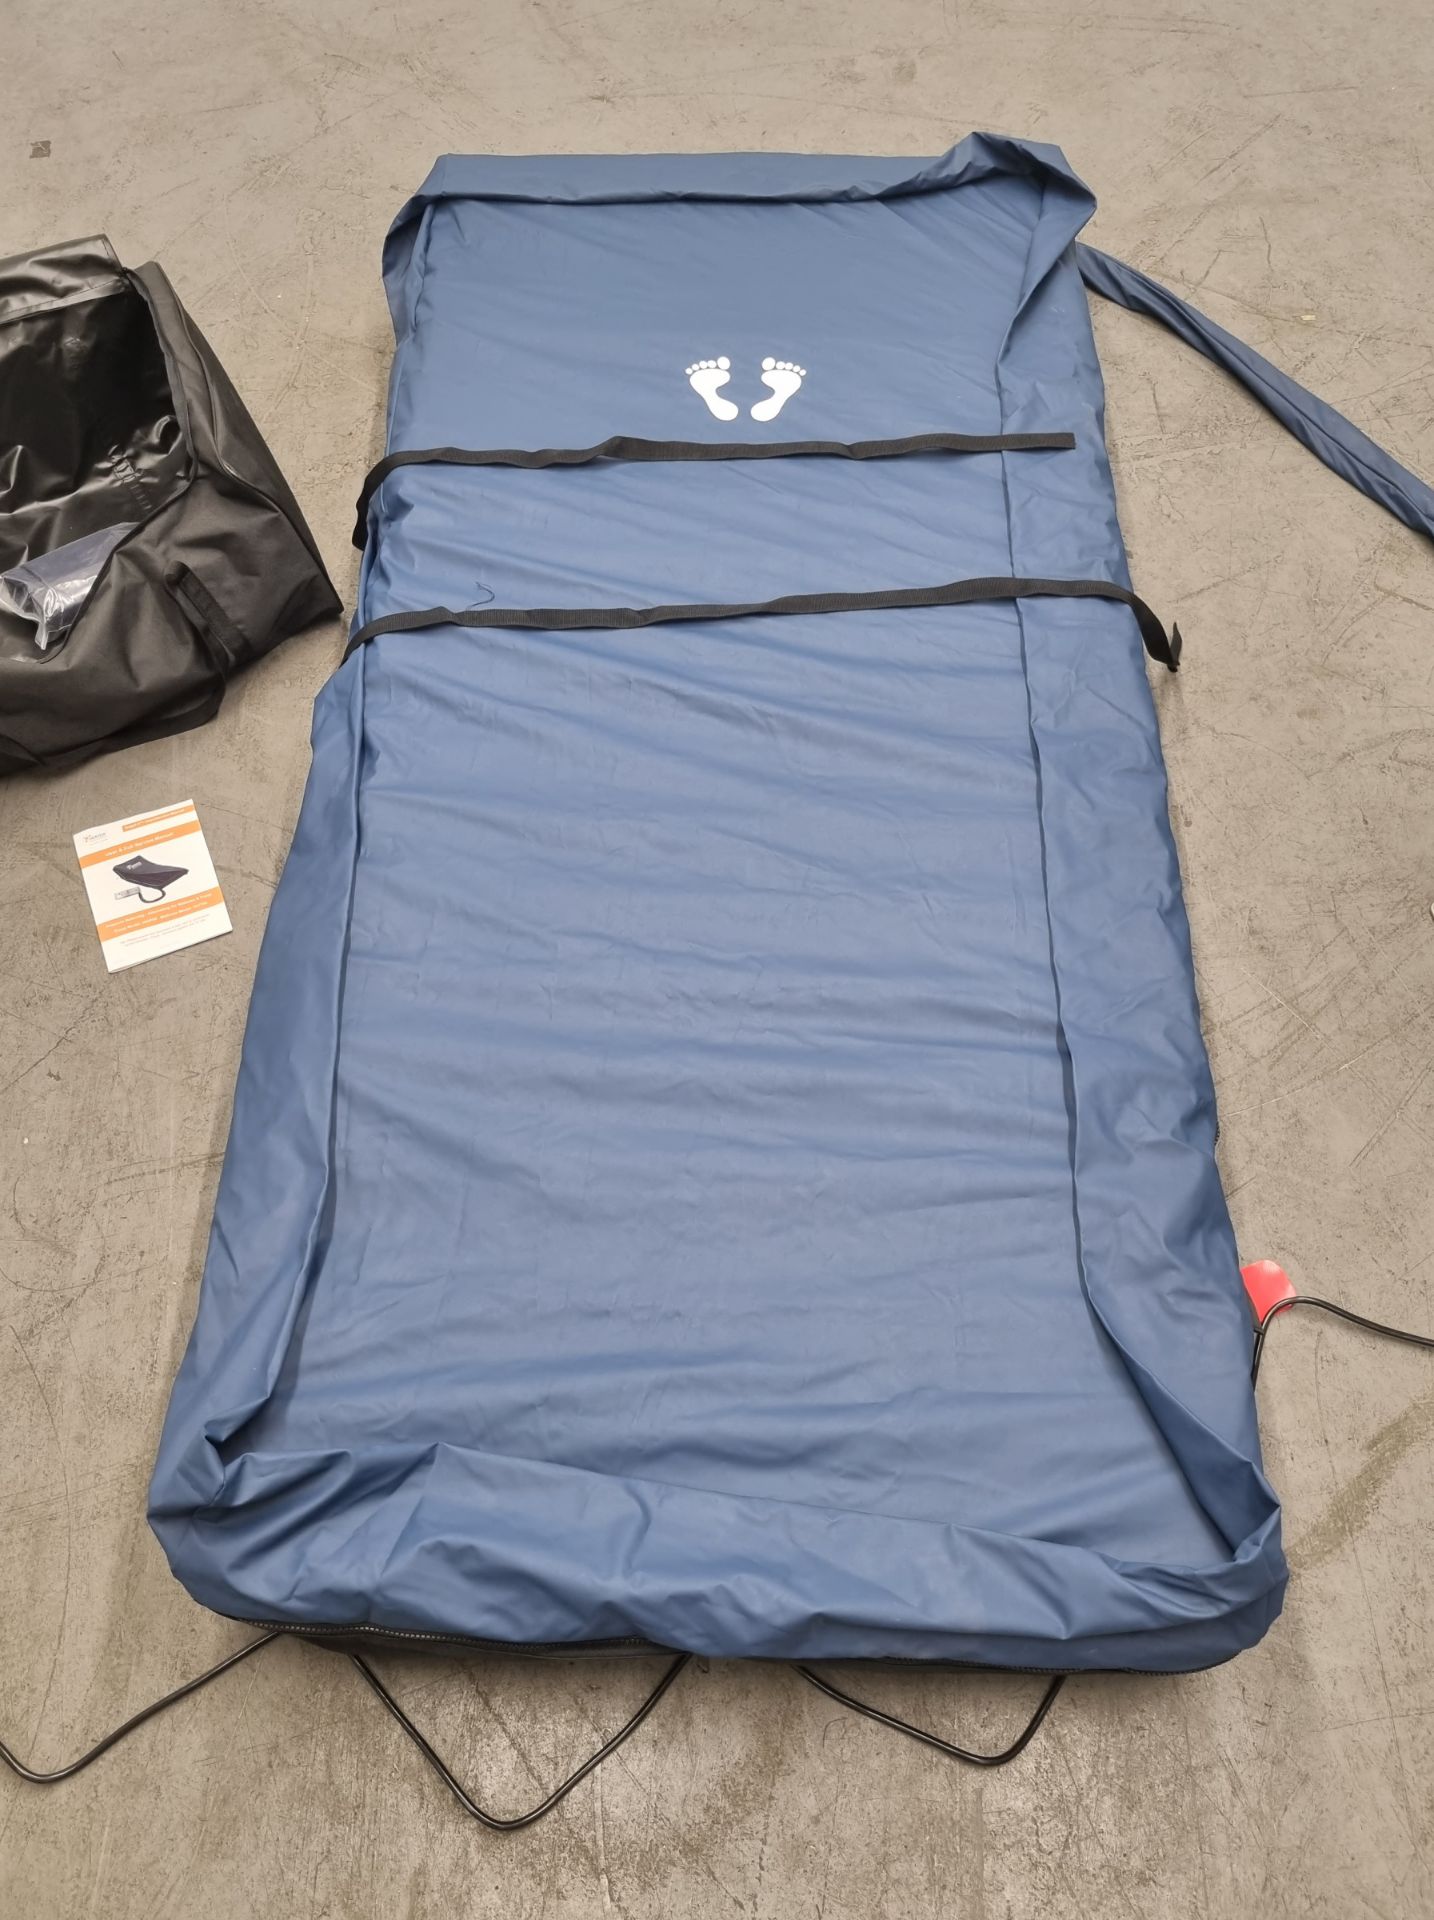 Herida Argyll II dynamic airflow mattress system with digital pump - unused in carry bag - Image 3 of 9